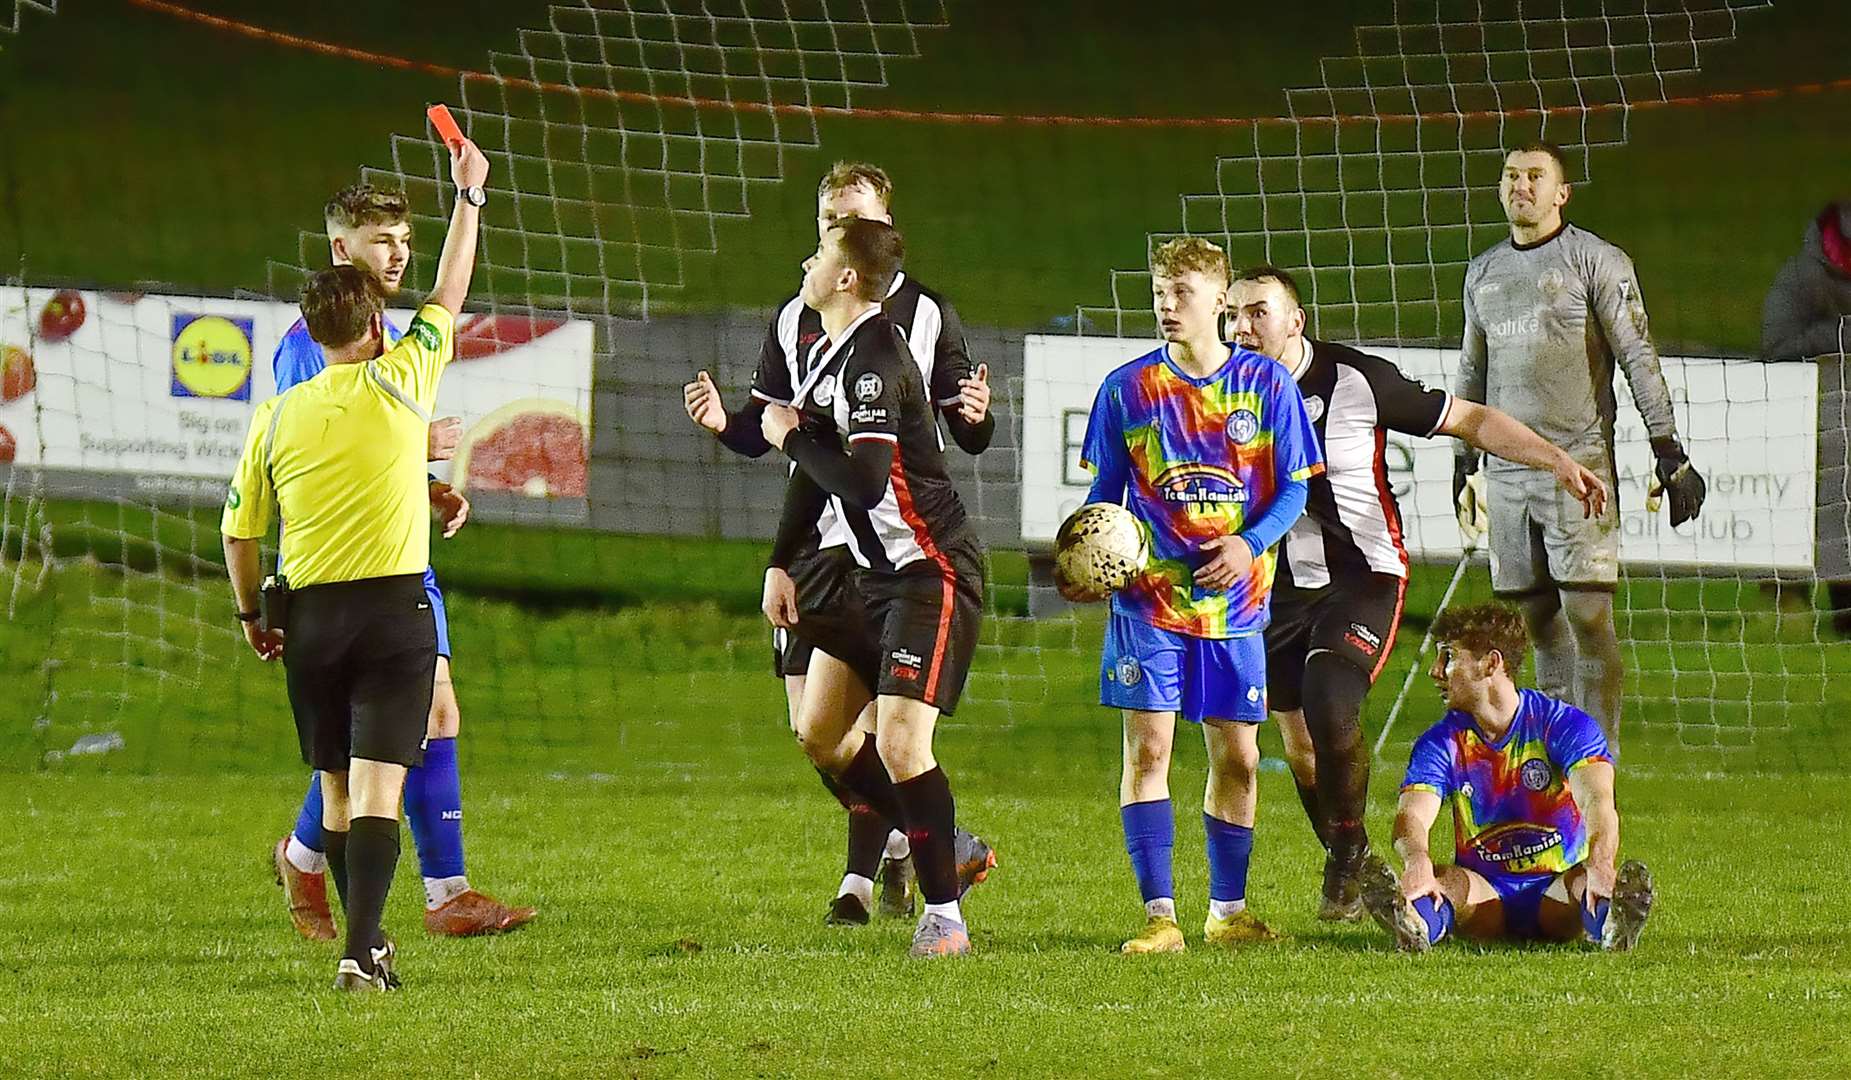 Referee Stuart Randall shows the red card to Wick Academy's Ryan Campbell for a foul on Ben Kelly on the edge of the penalty area. Picture: Mel Roger